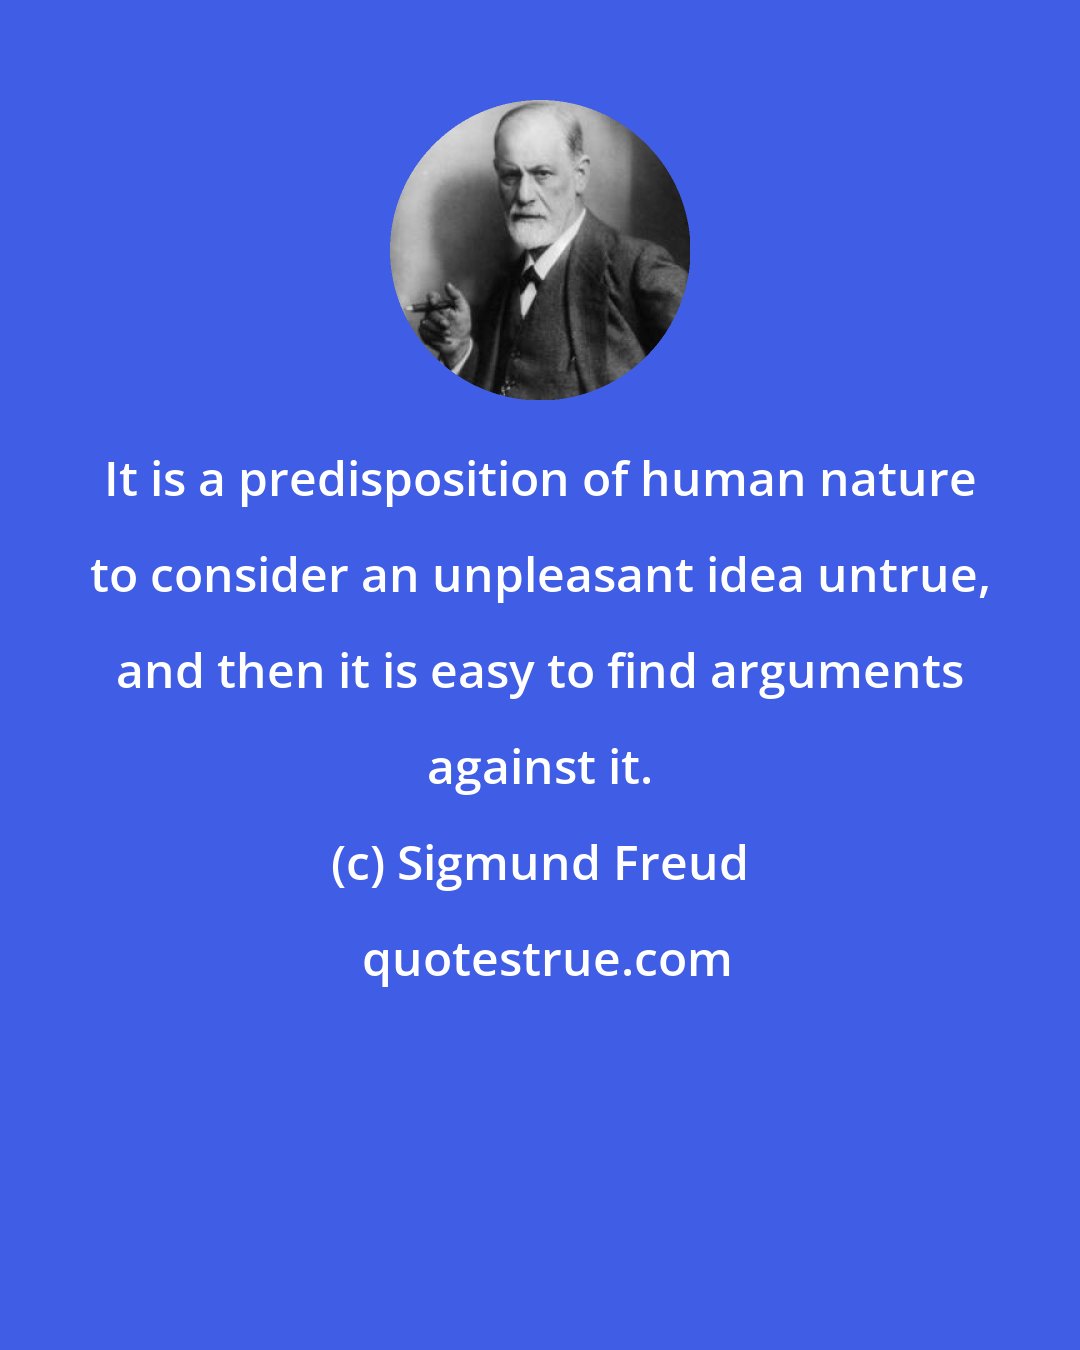 Sigmund Freud: It is a predisposition of human nature to consider an unpleasant idea untrue, and then it is easy to find arguments against it.